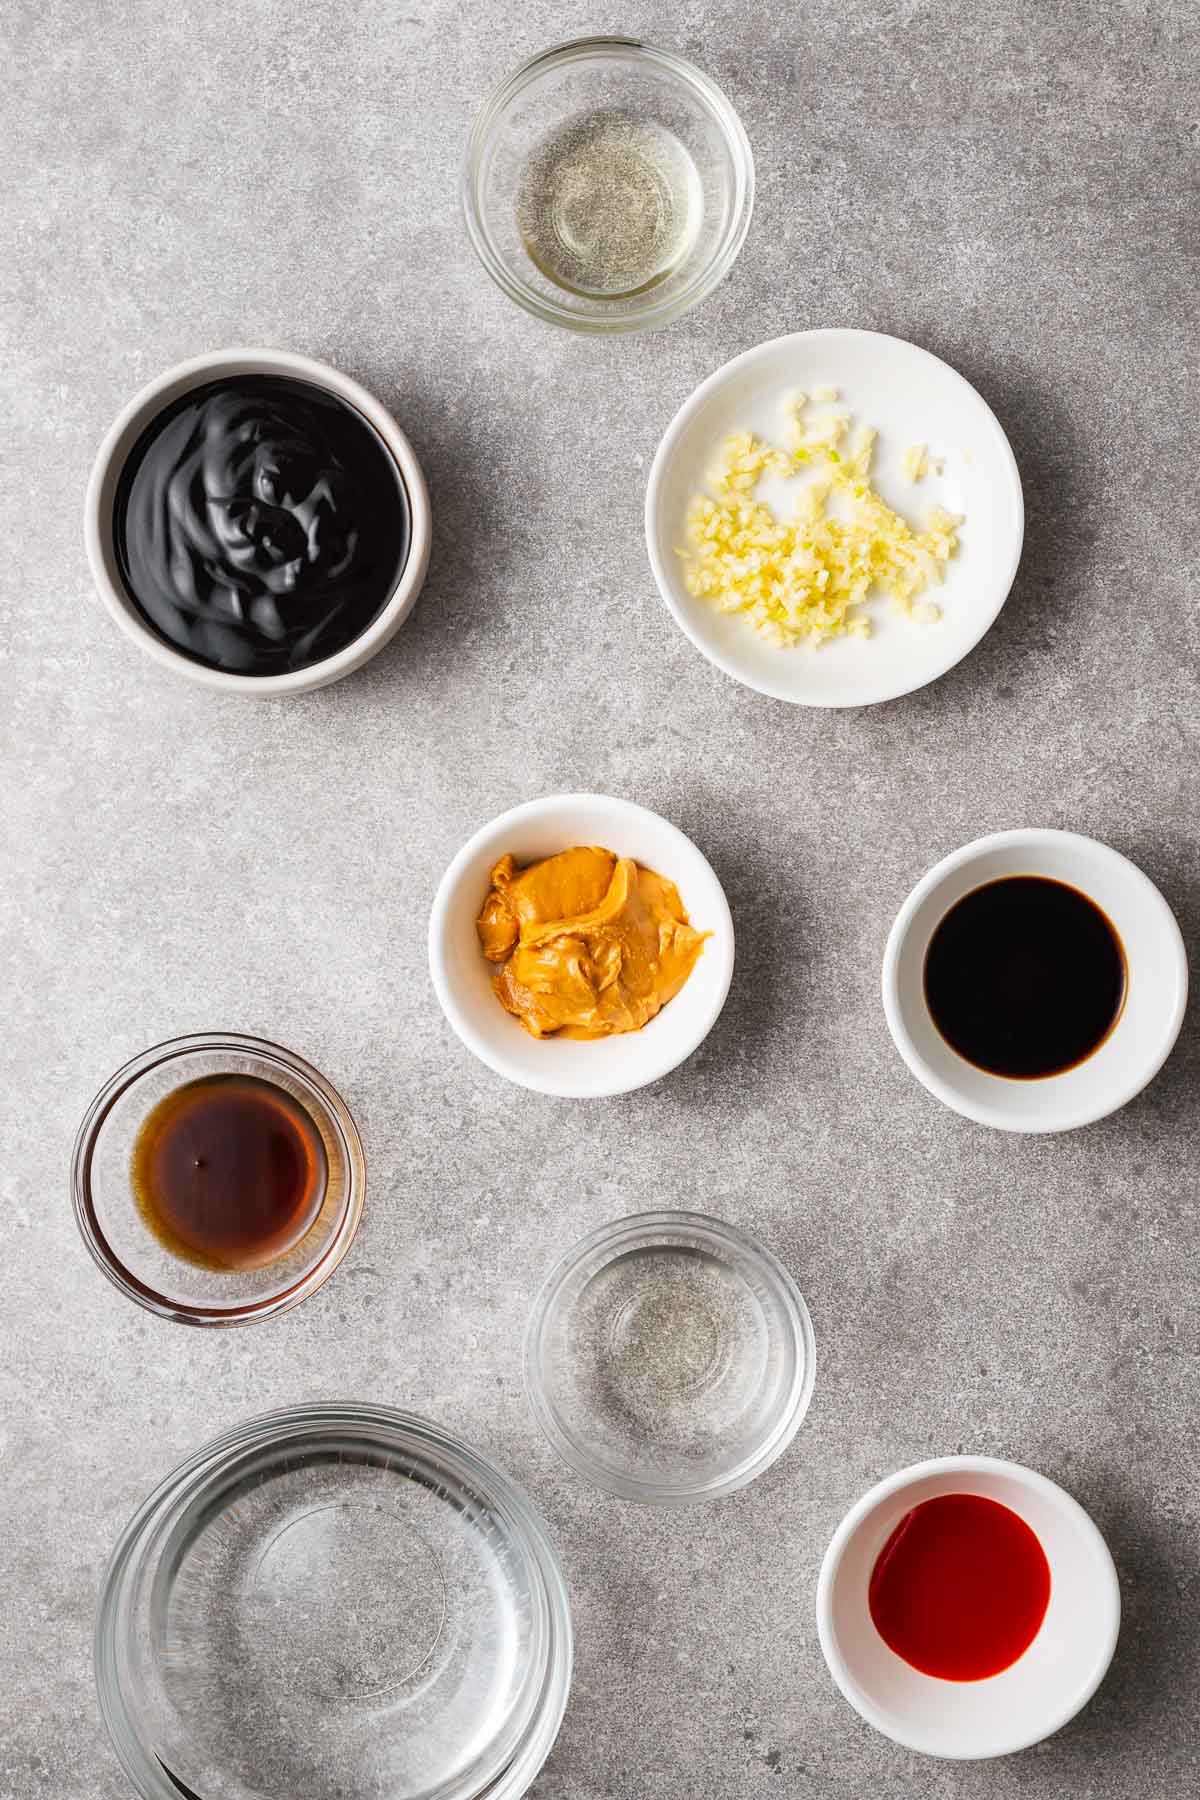 Ingredients for hoisin peanut sauce arranged in small bowls including hoisin sauce, peanut butter, minced garlic, toasted sesame oil, sriracha sauce, rice vinegar and water.